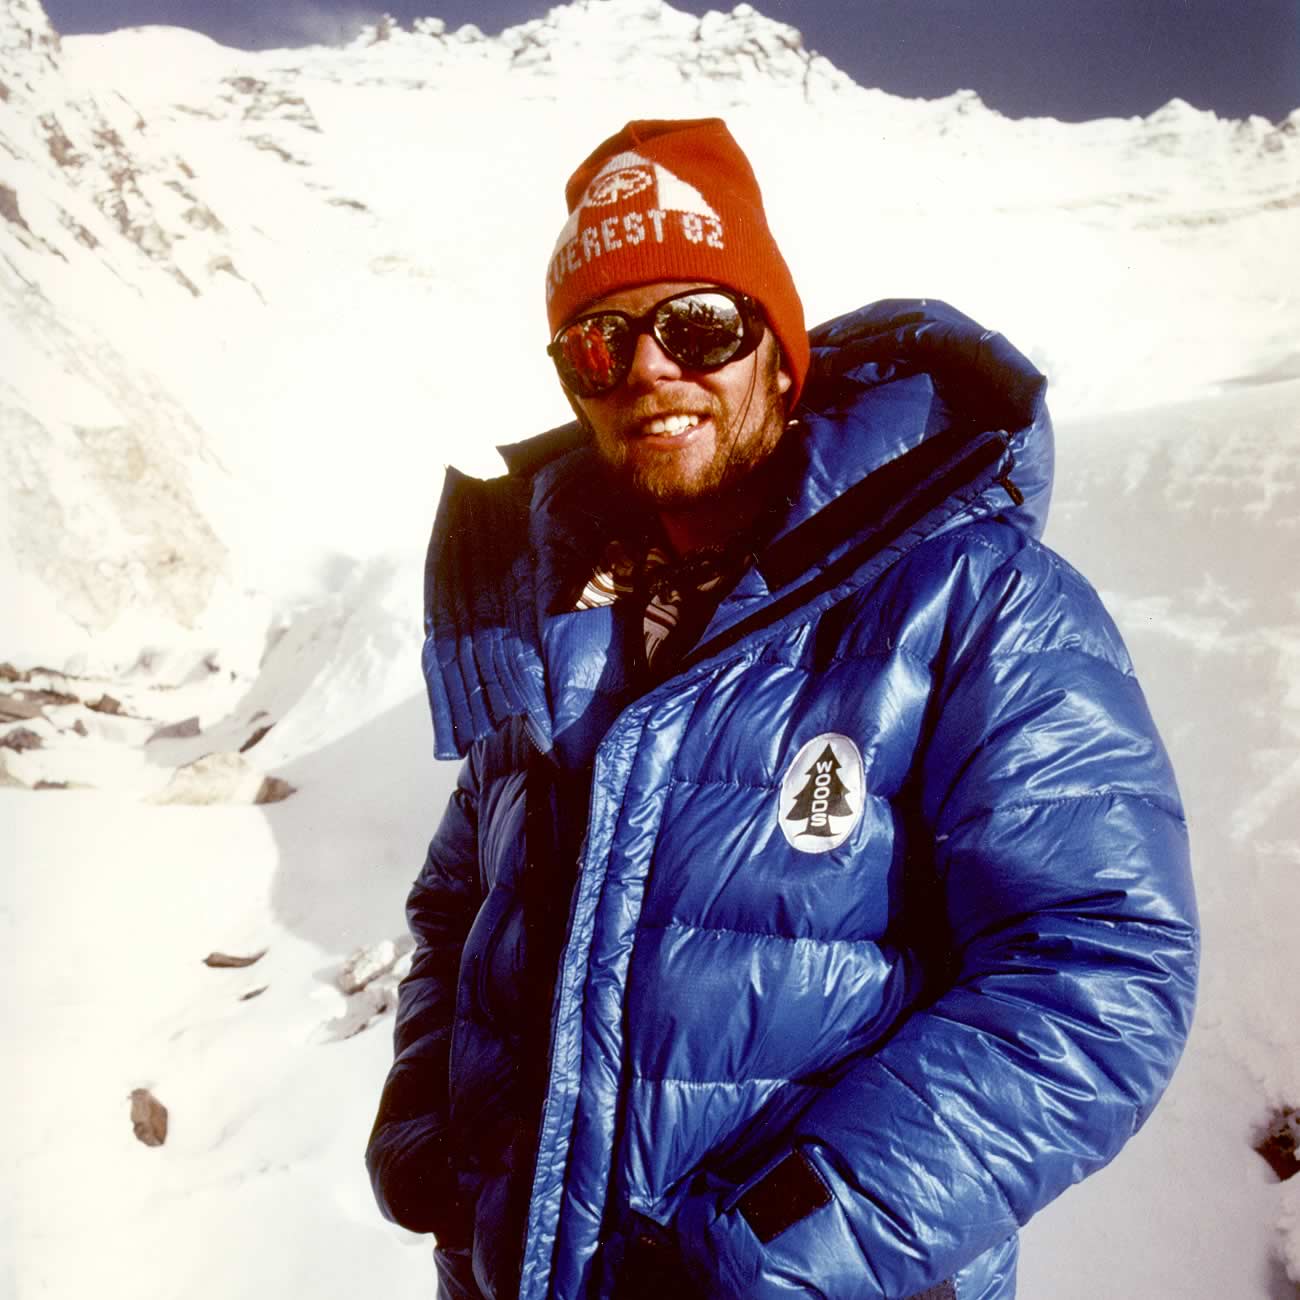 A young male mountaineer wearing reflective sunglasses, a red Everest '82 expedition hat, and a thick blue Woods jacket on a snowy mountainside.